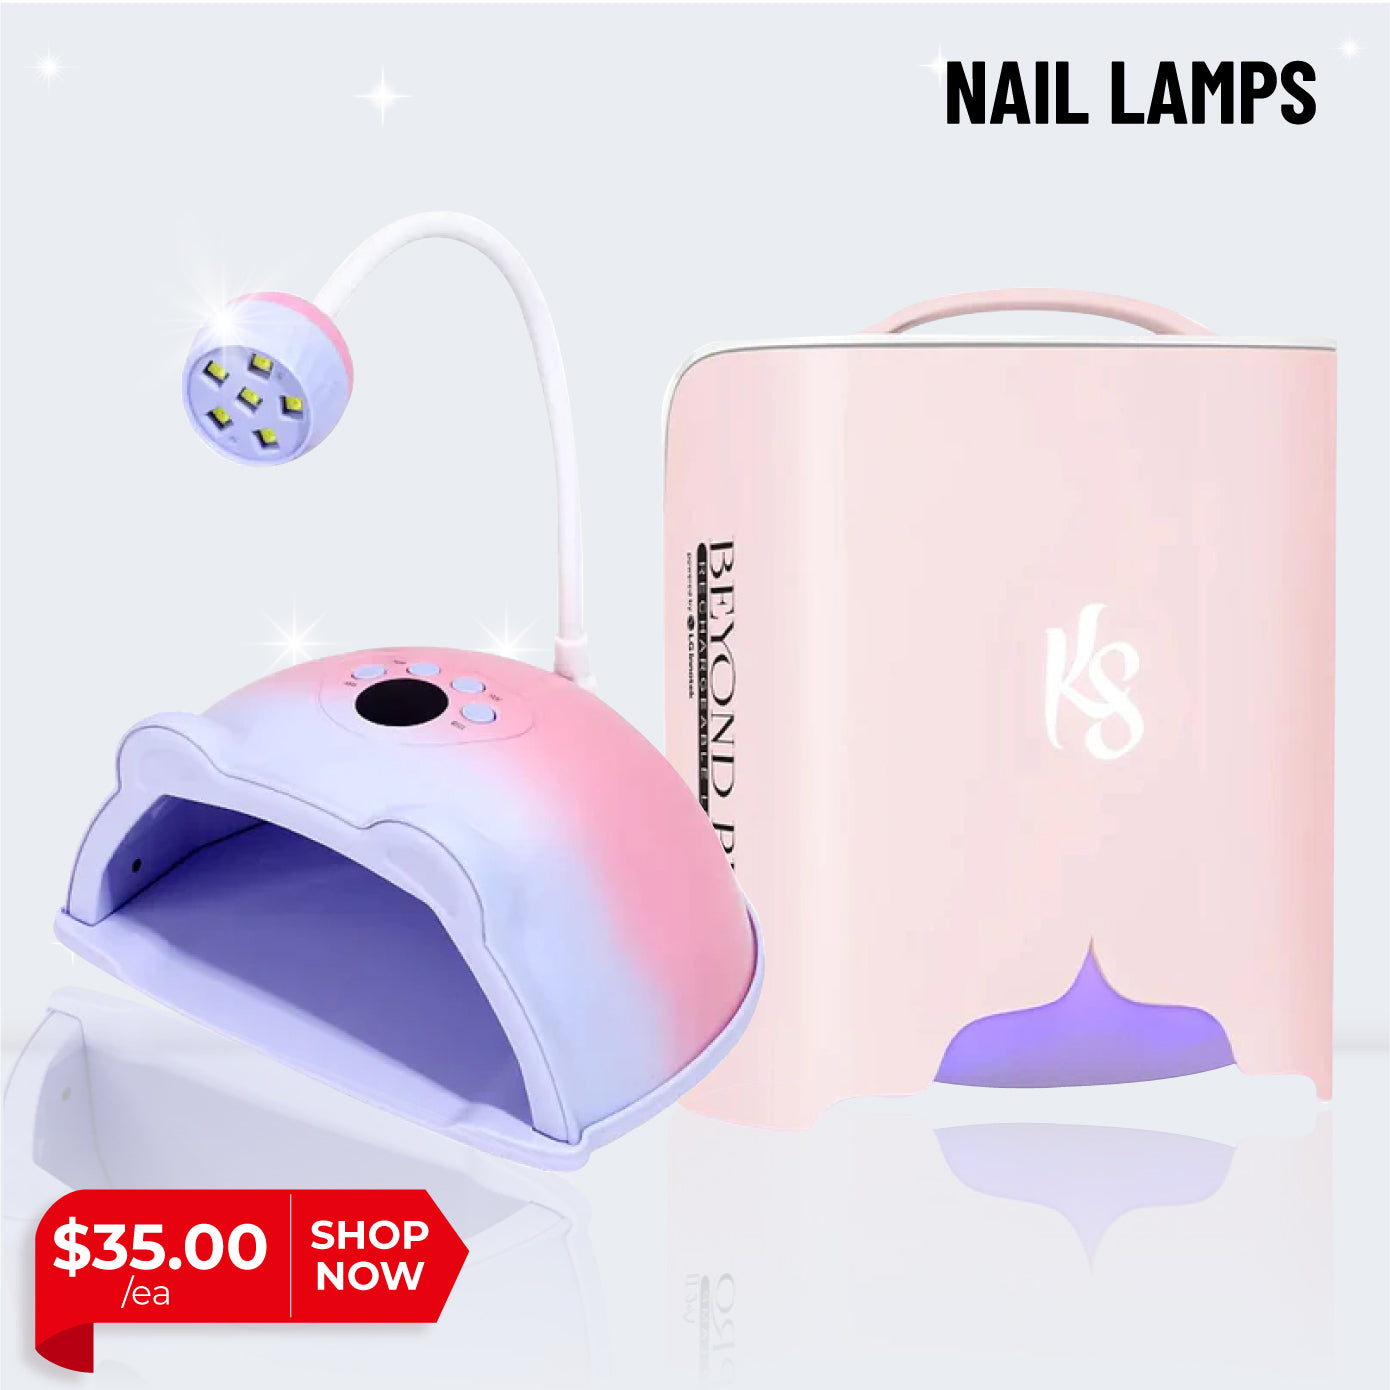 EXTENSION NAIL LAMP - Portable & Rechargeable Focused Beam Led Light - —  ATN Nail Supply